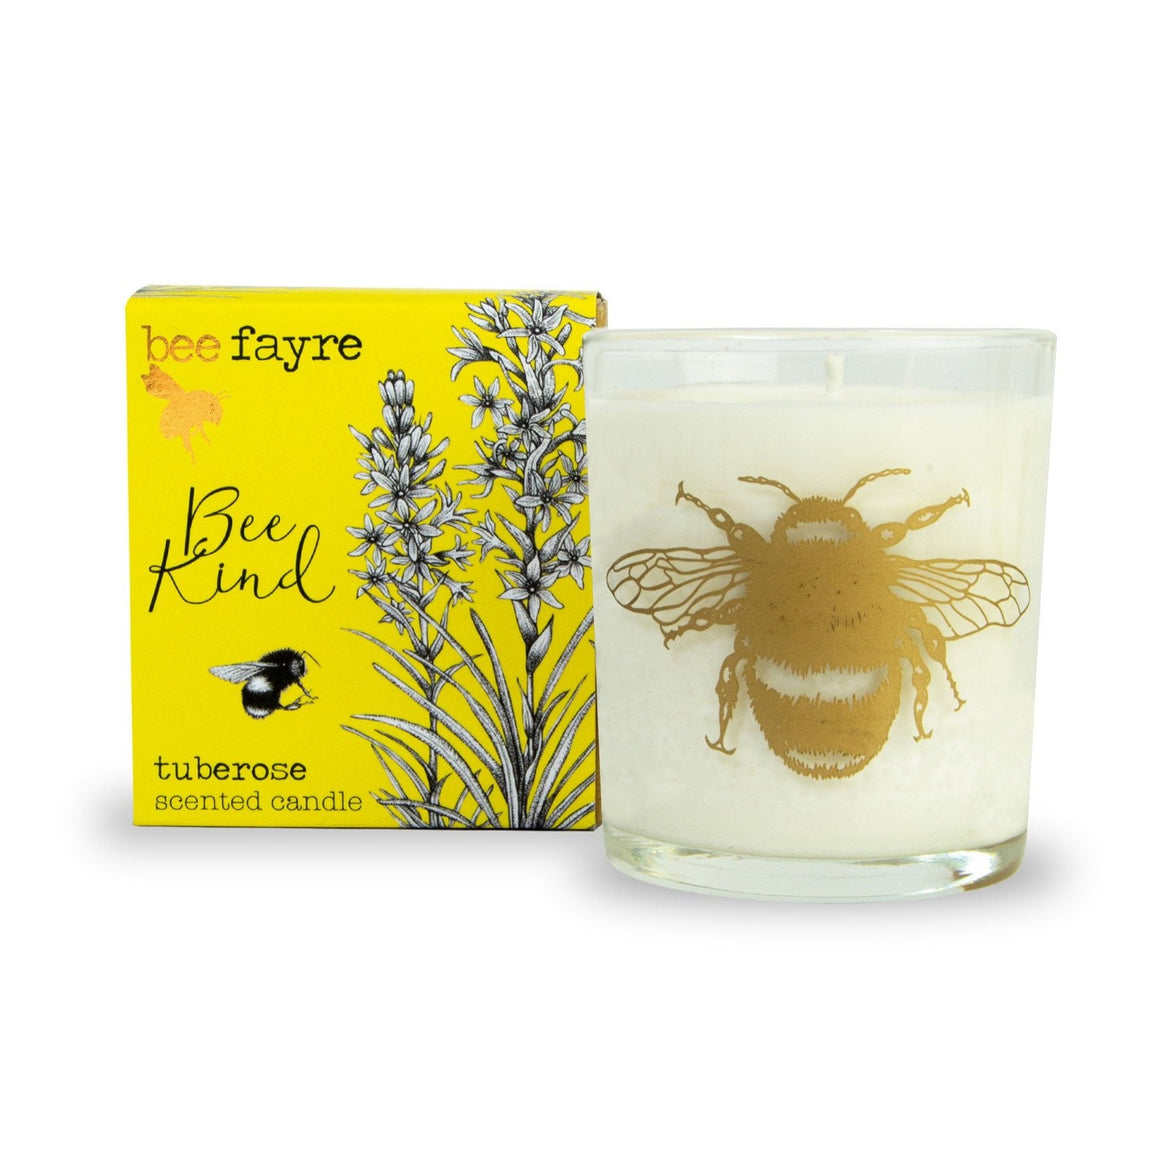 Bee Fayre Bee Kind Tuberose Large Scented Candle